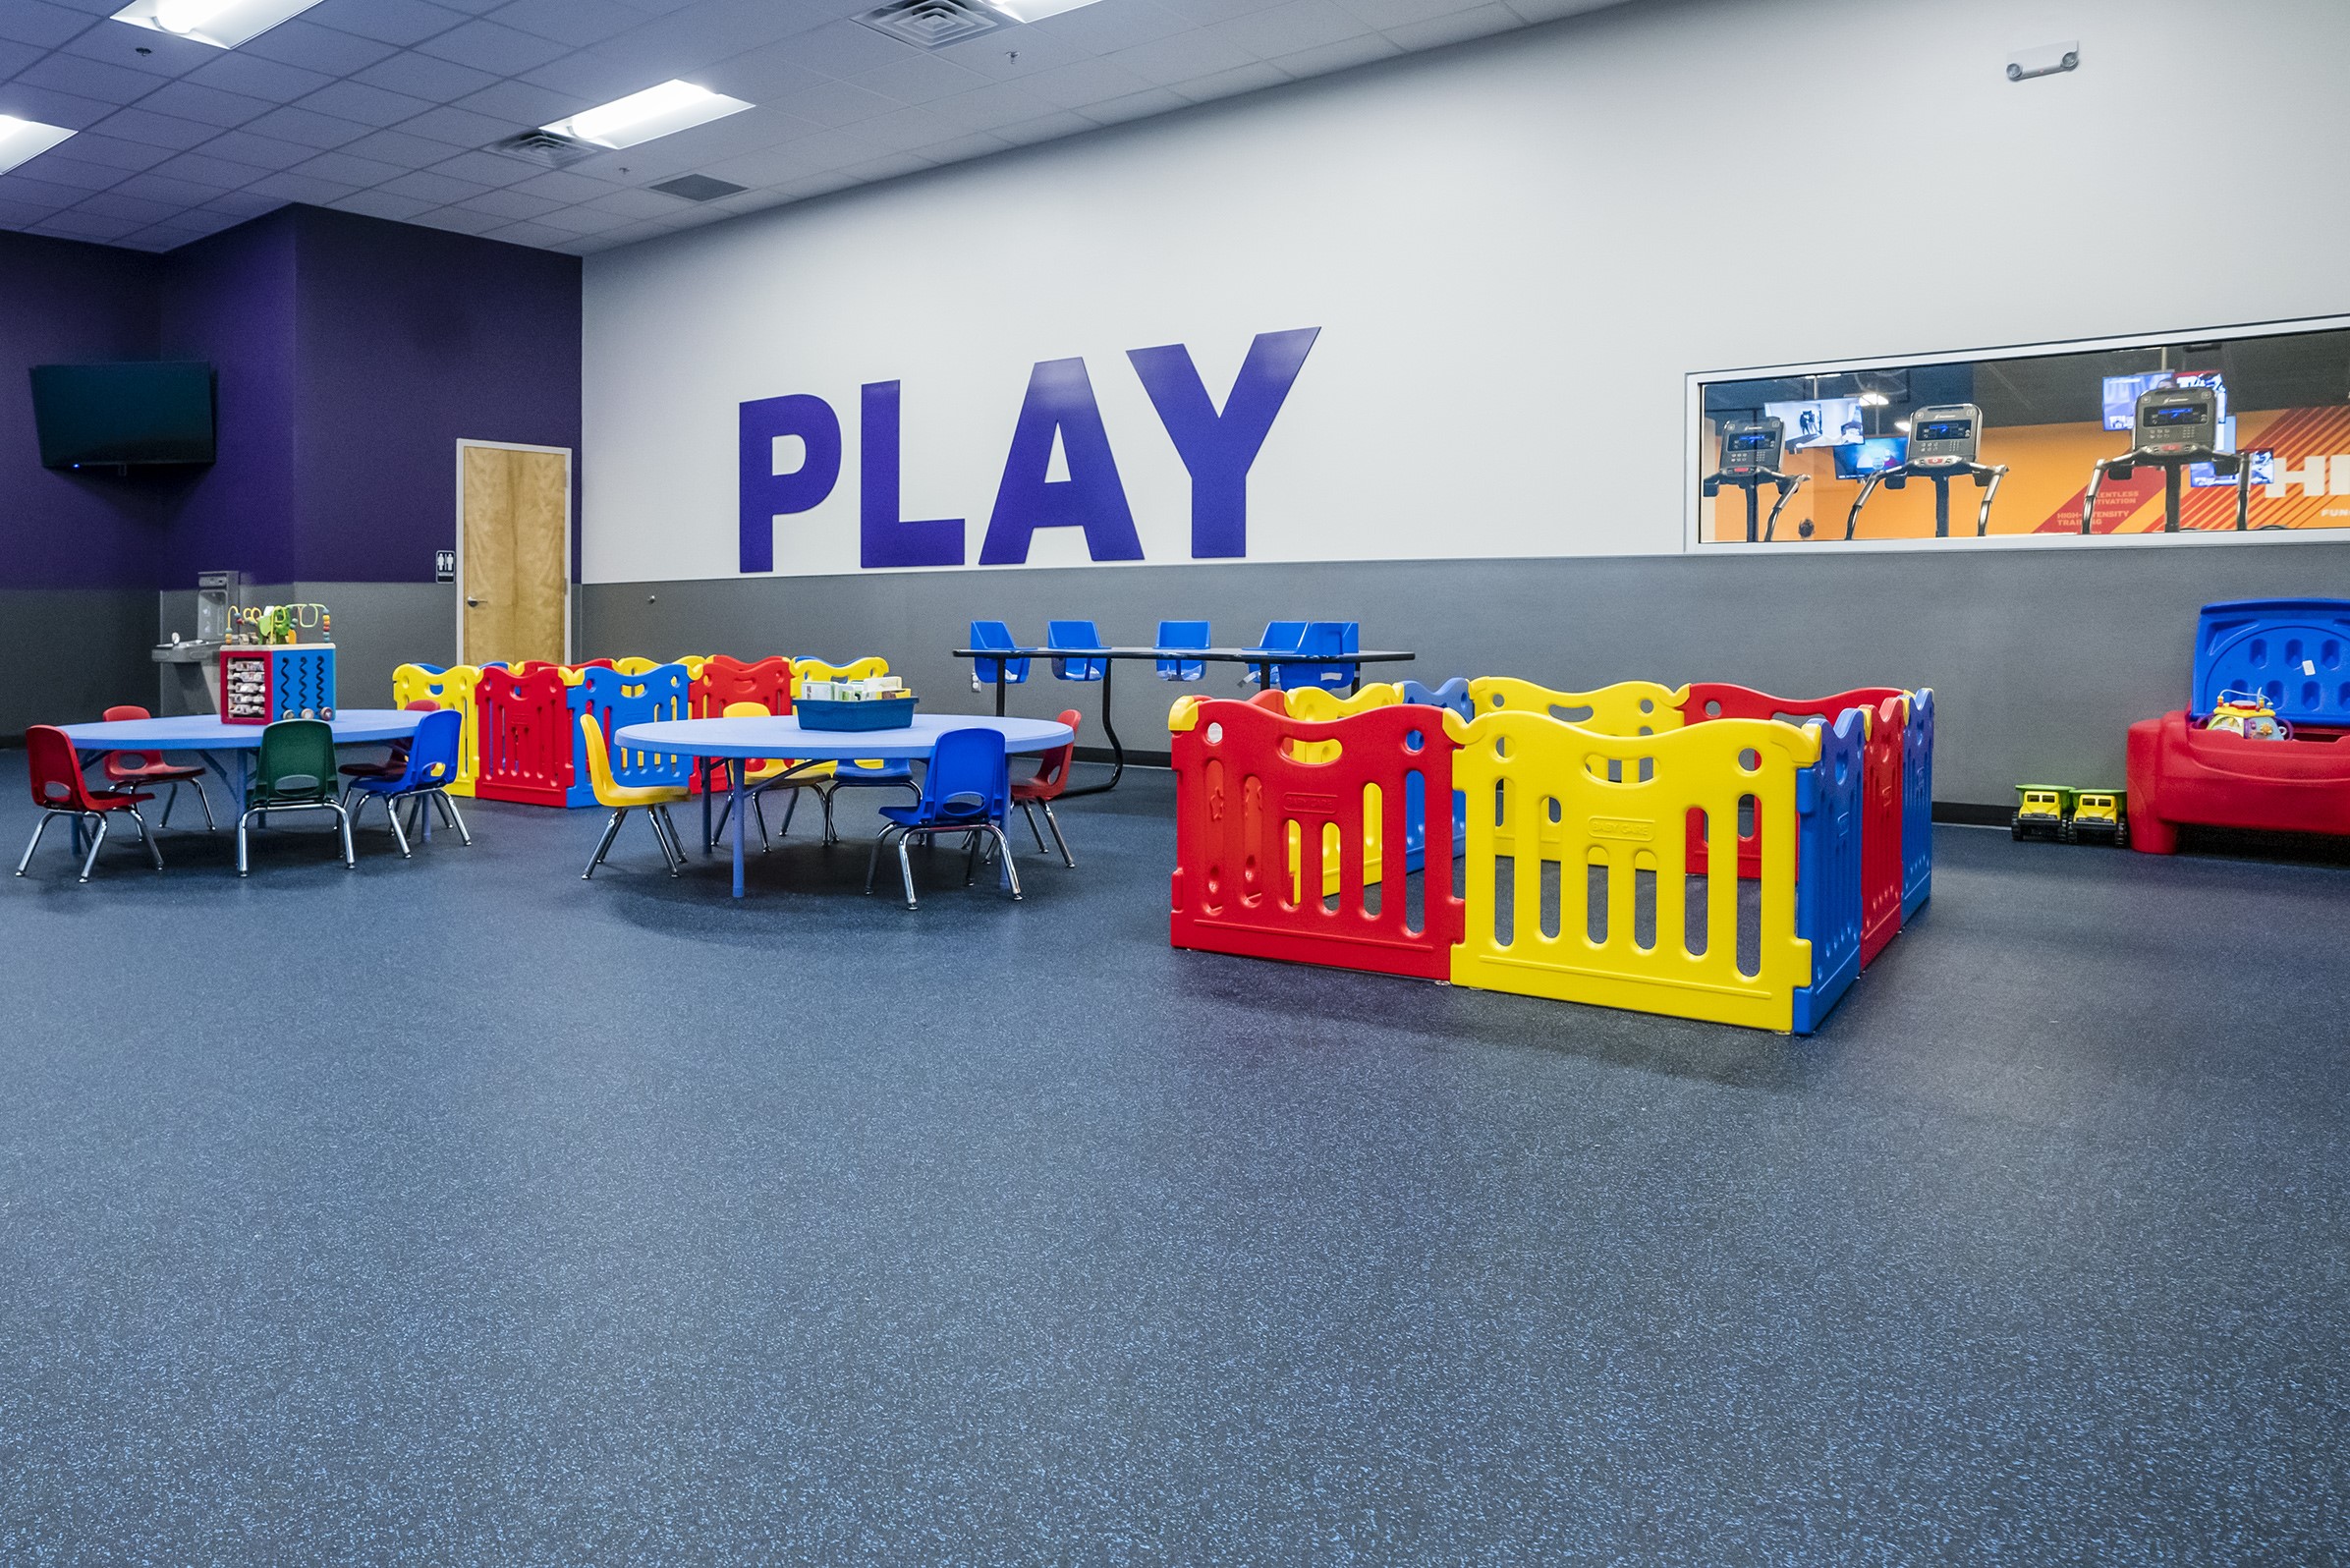 The Kid's Crunch Babysitting room at Crunch Fitness -- work out with peace of mind that your kids are taken care of.